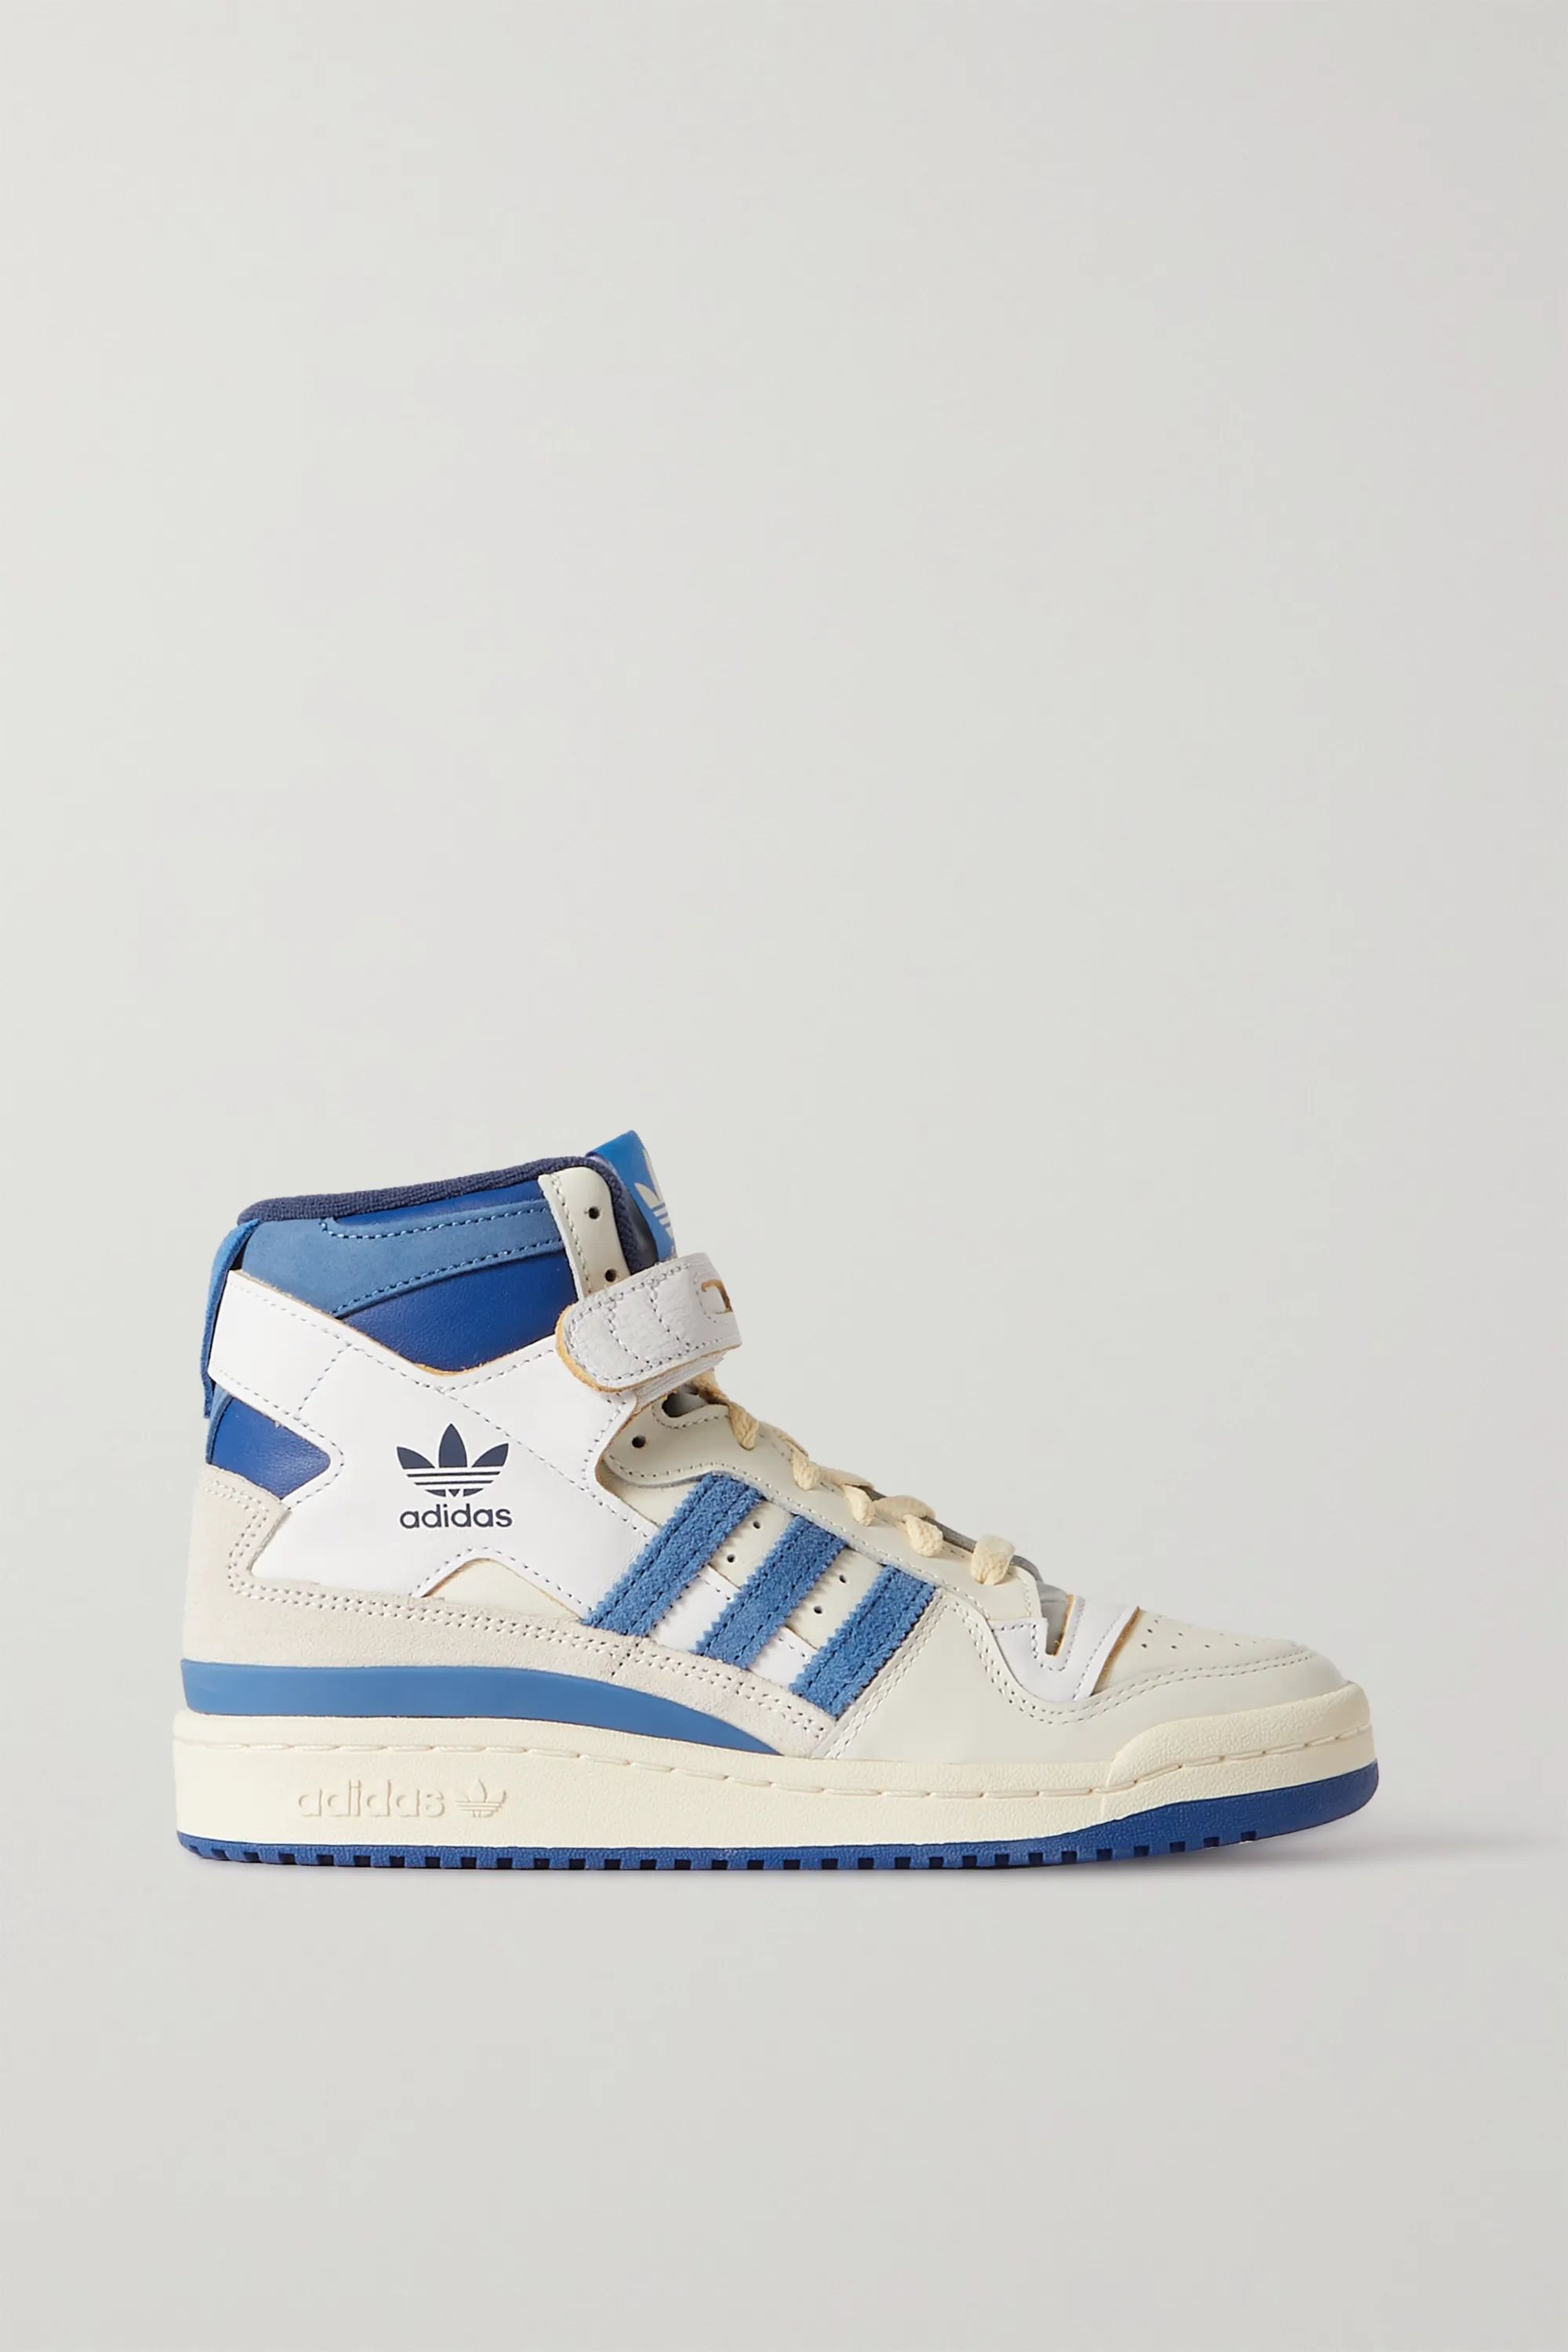 OG Forum 84 leather and suede high top sneakers | NET-A-PORTER (UK & EU)